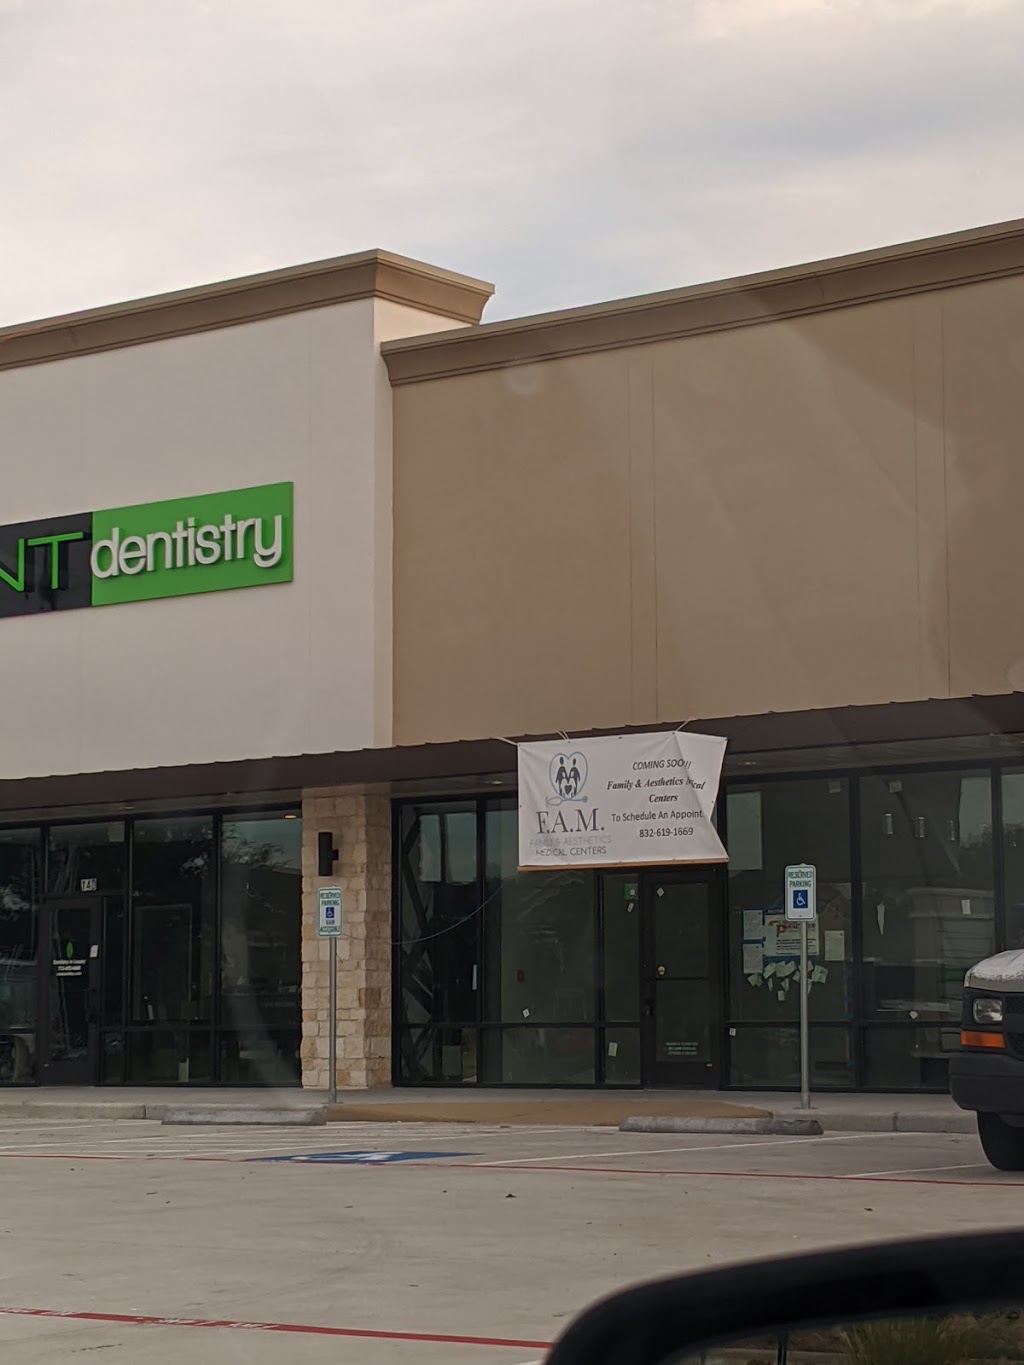 F.A.M. Family & Aesthetics medical center | 12568 Broadway St Suite 160, Pearland, TX 77584 | Phone: (832) 619-1669